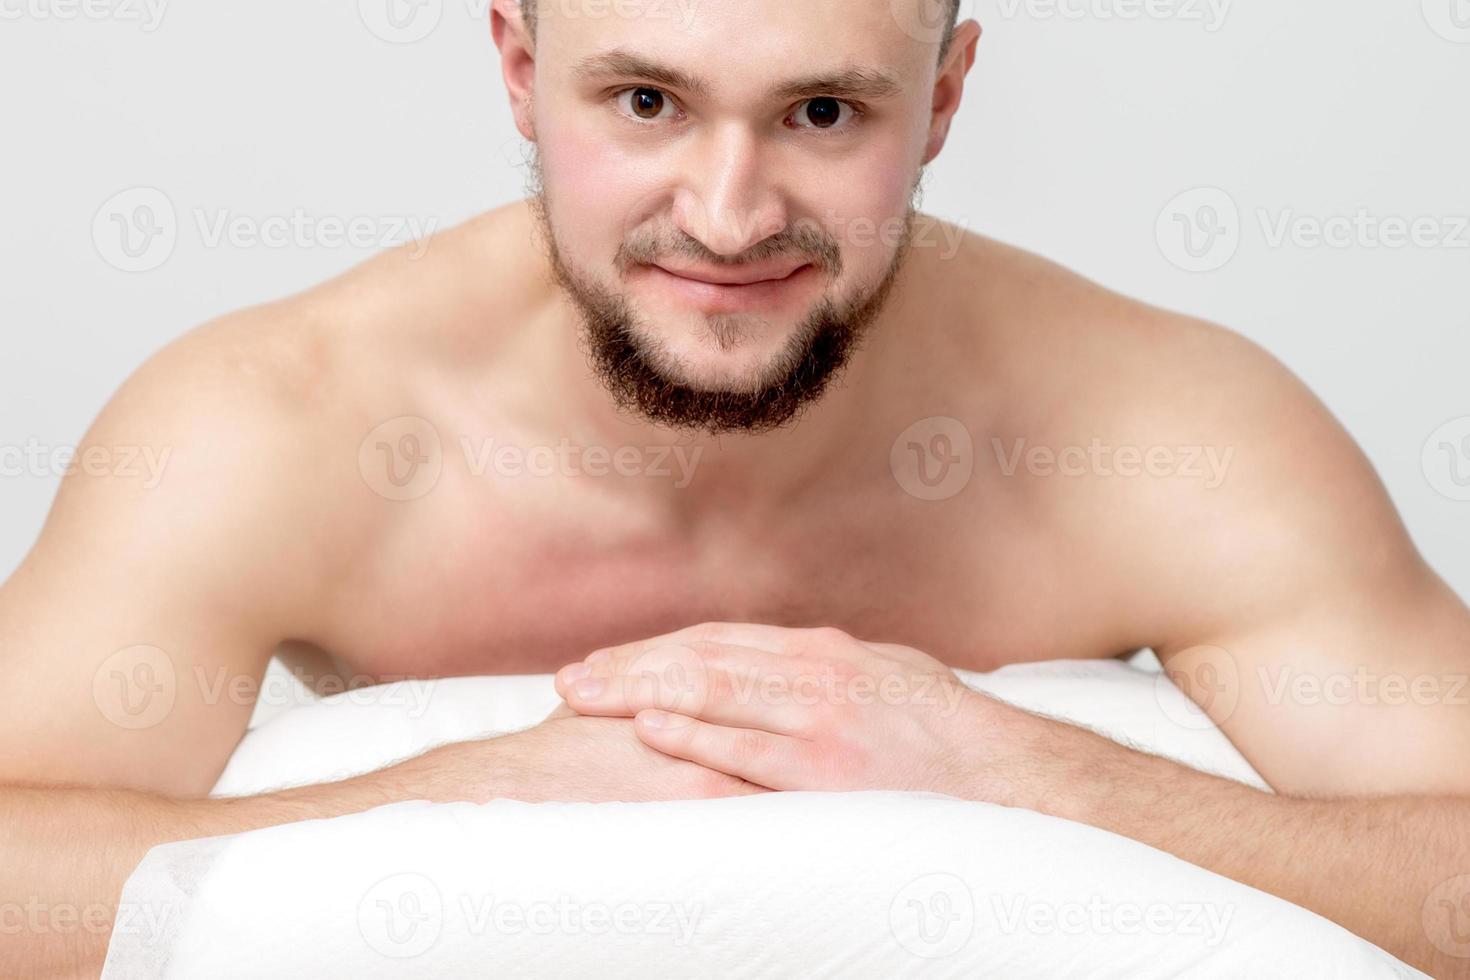 Man lying on front on table spa photo